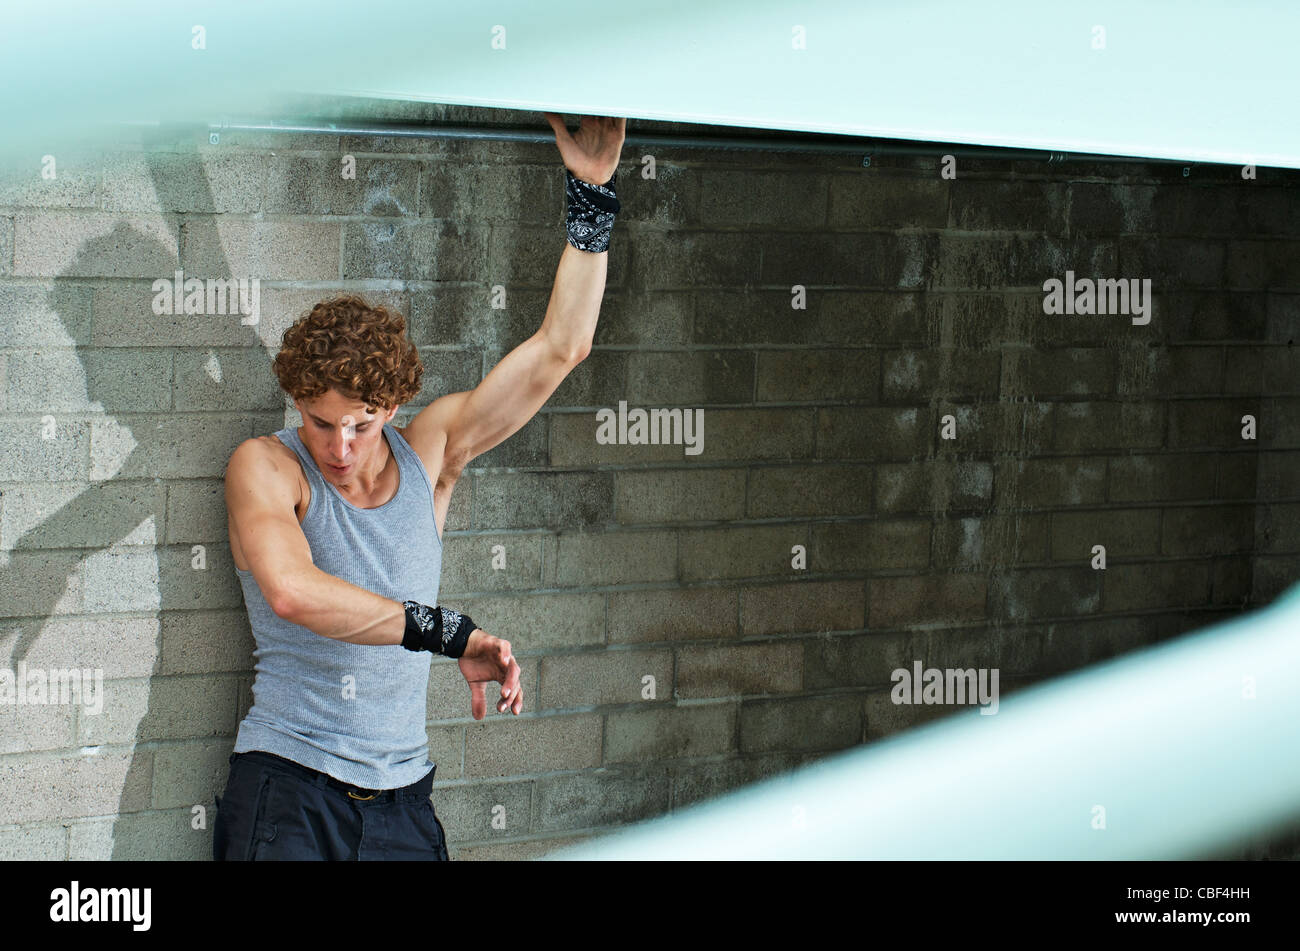 A portrait of a parkour freerunning athlete. Stock Photo